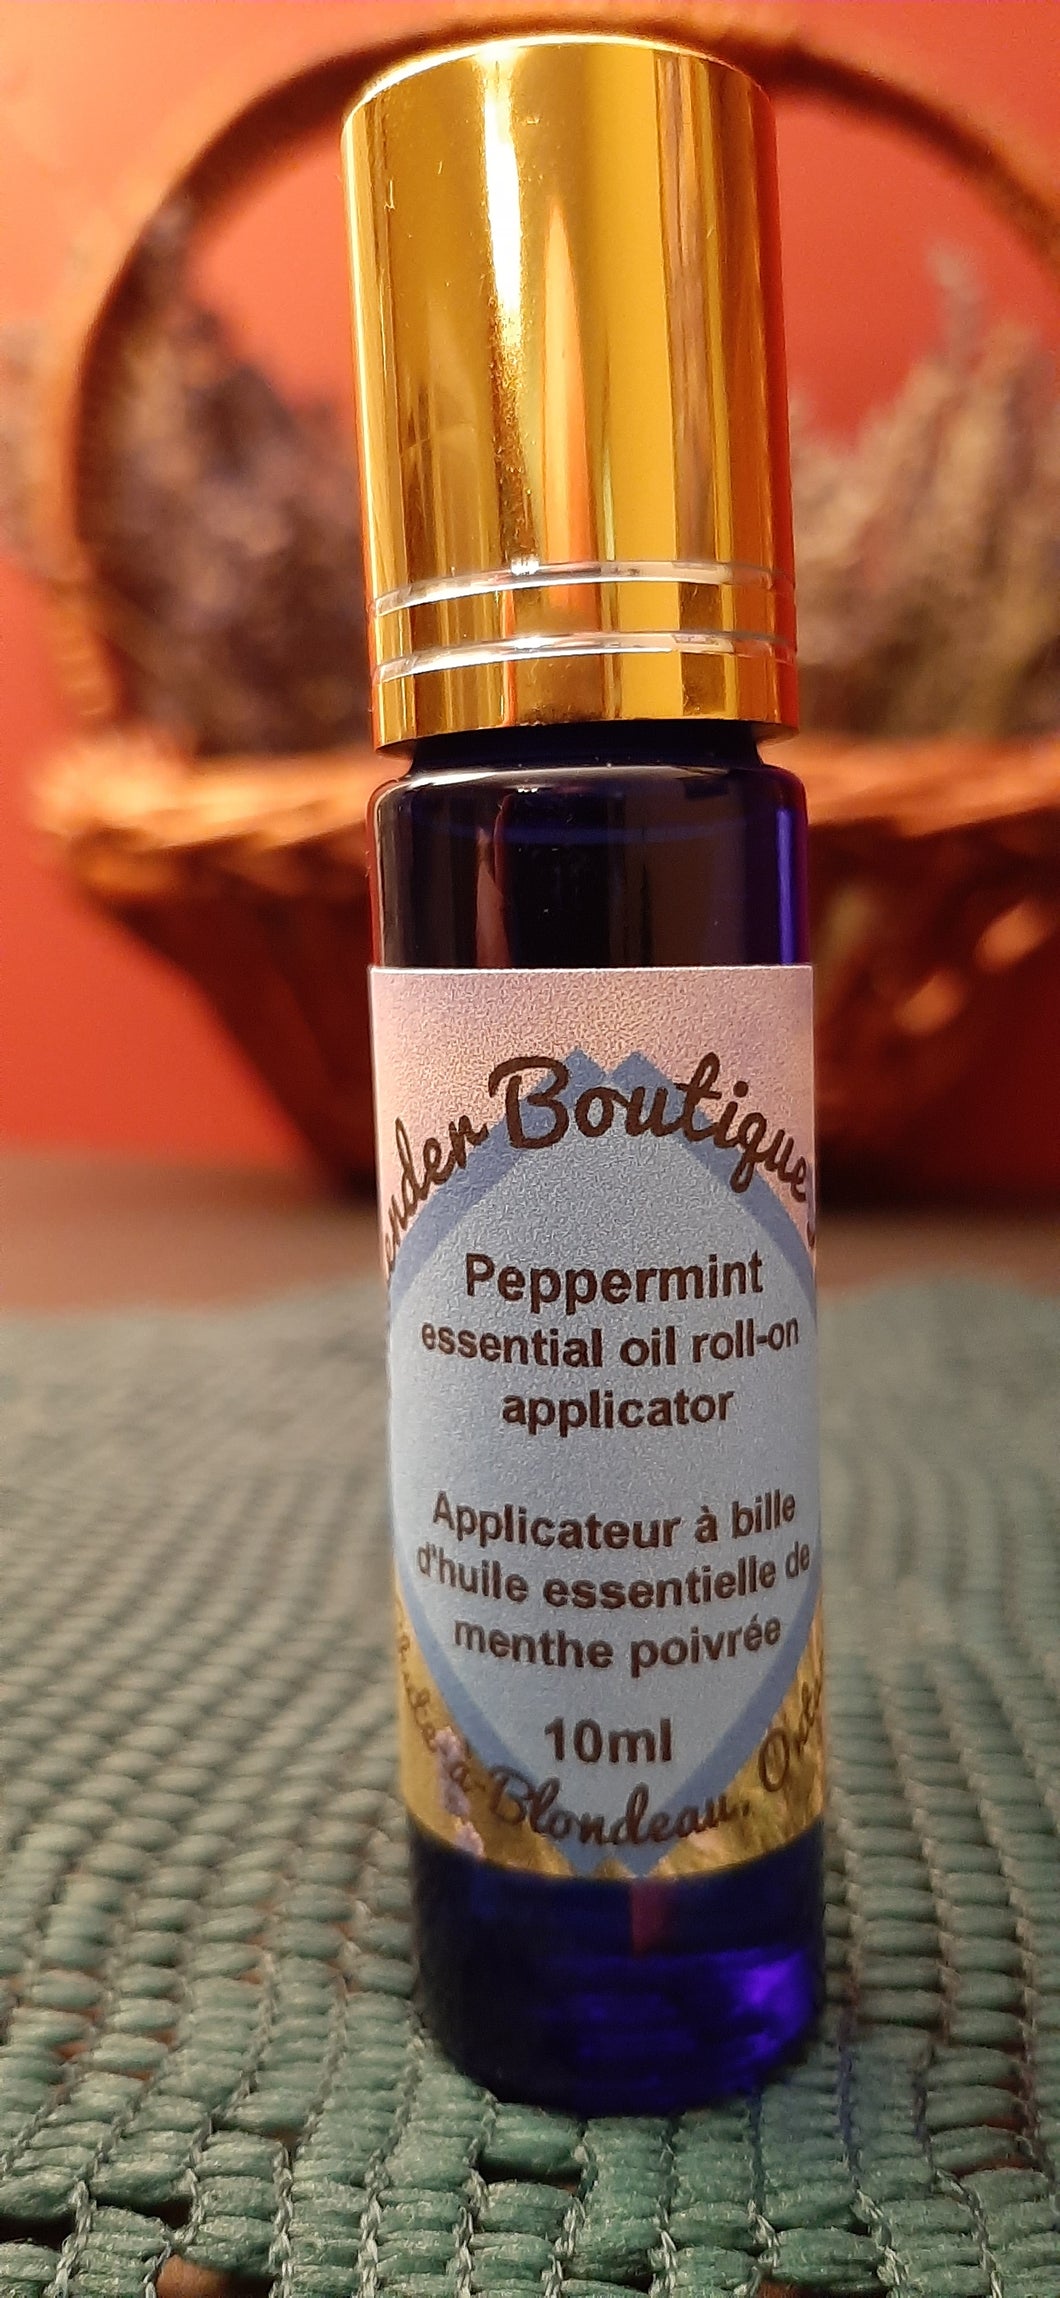 Peppermint essential oil roll on